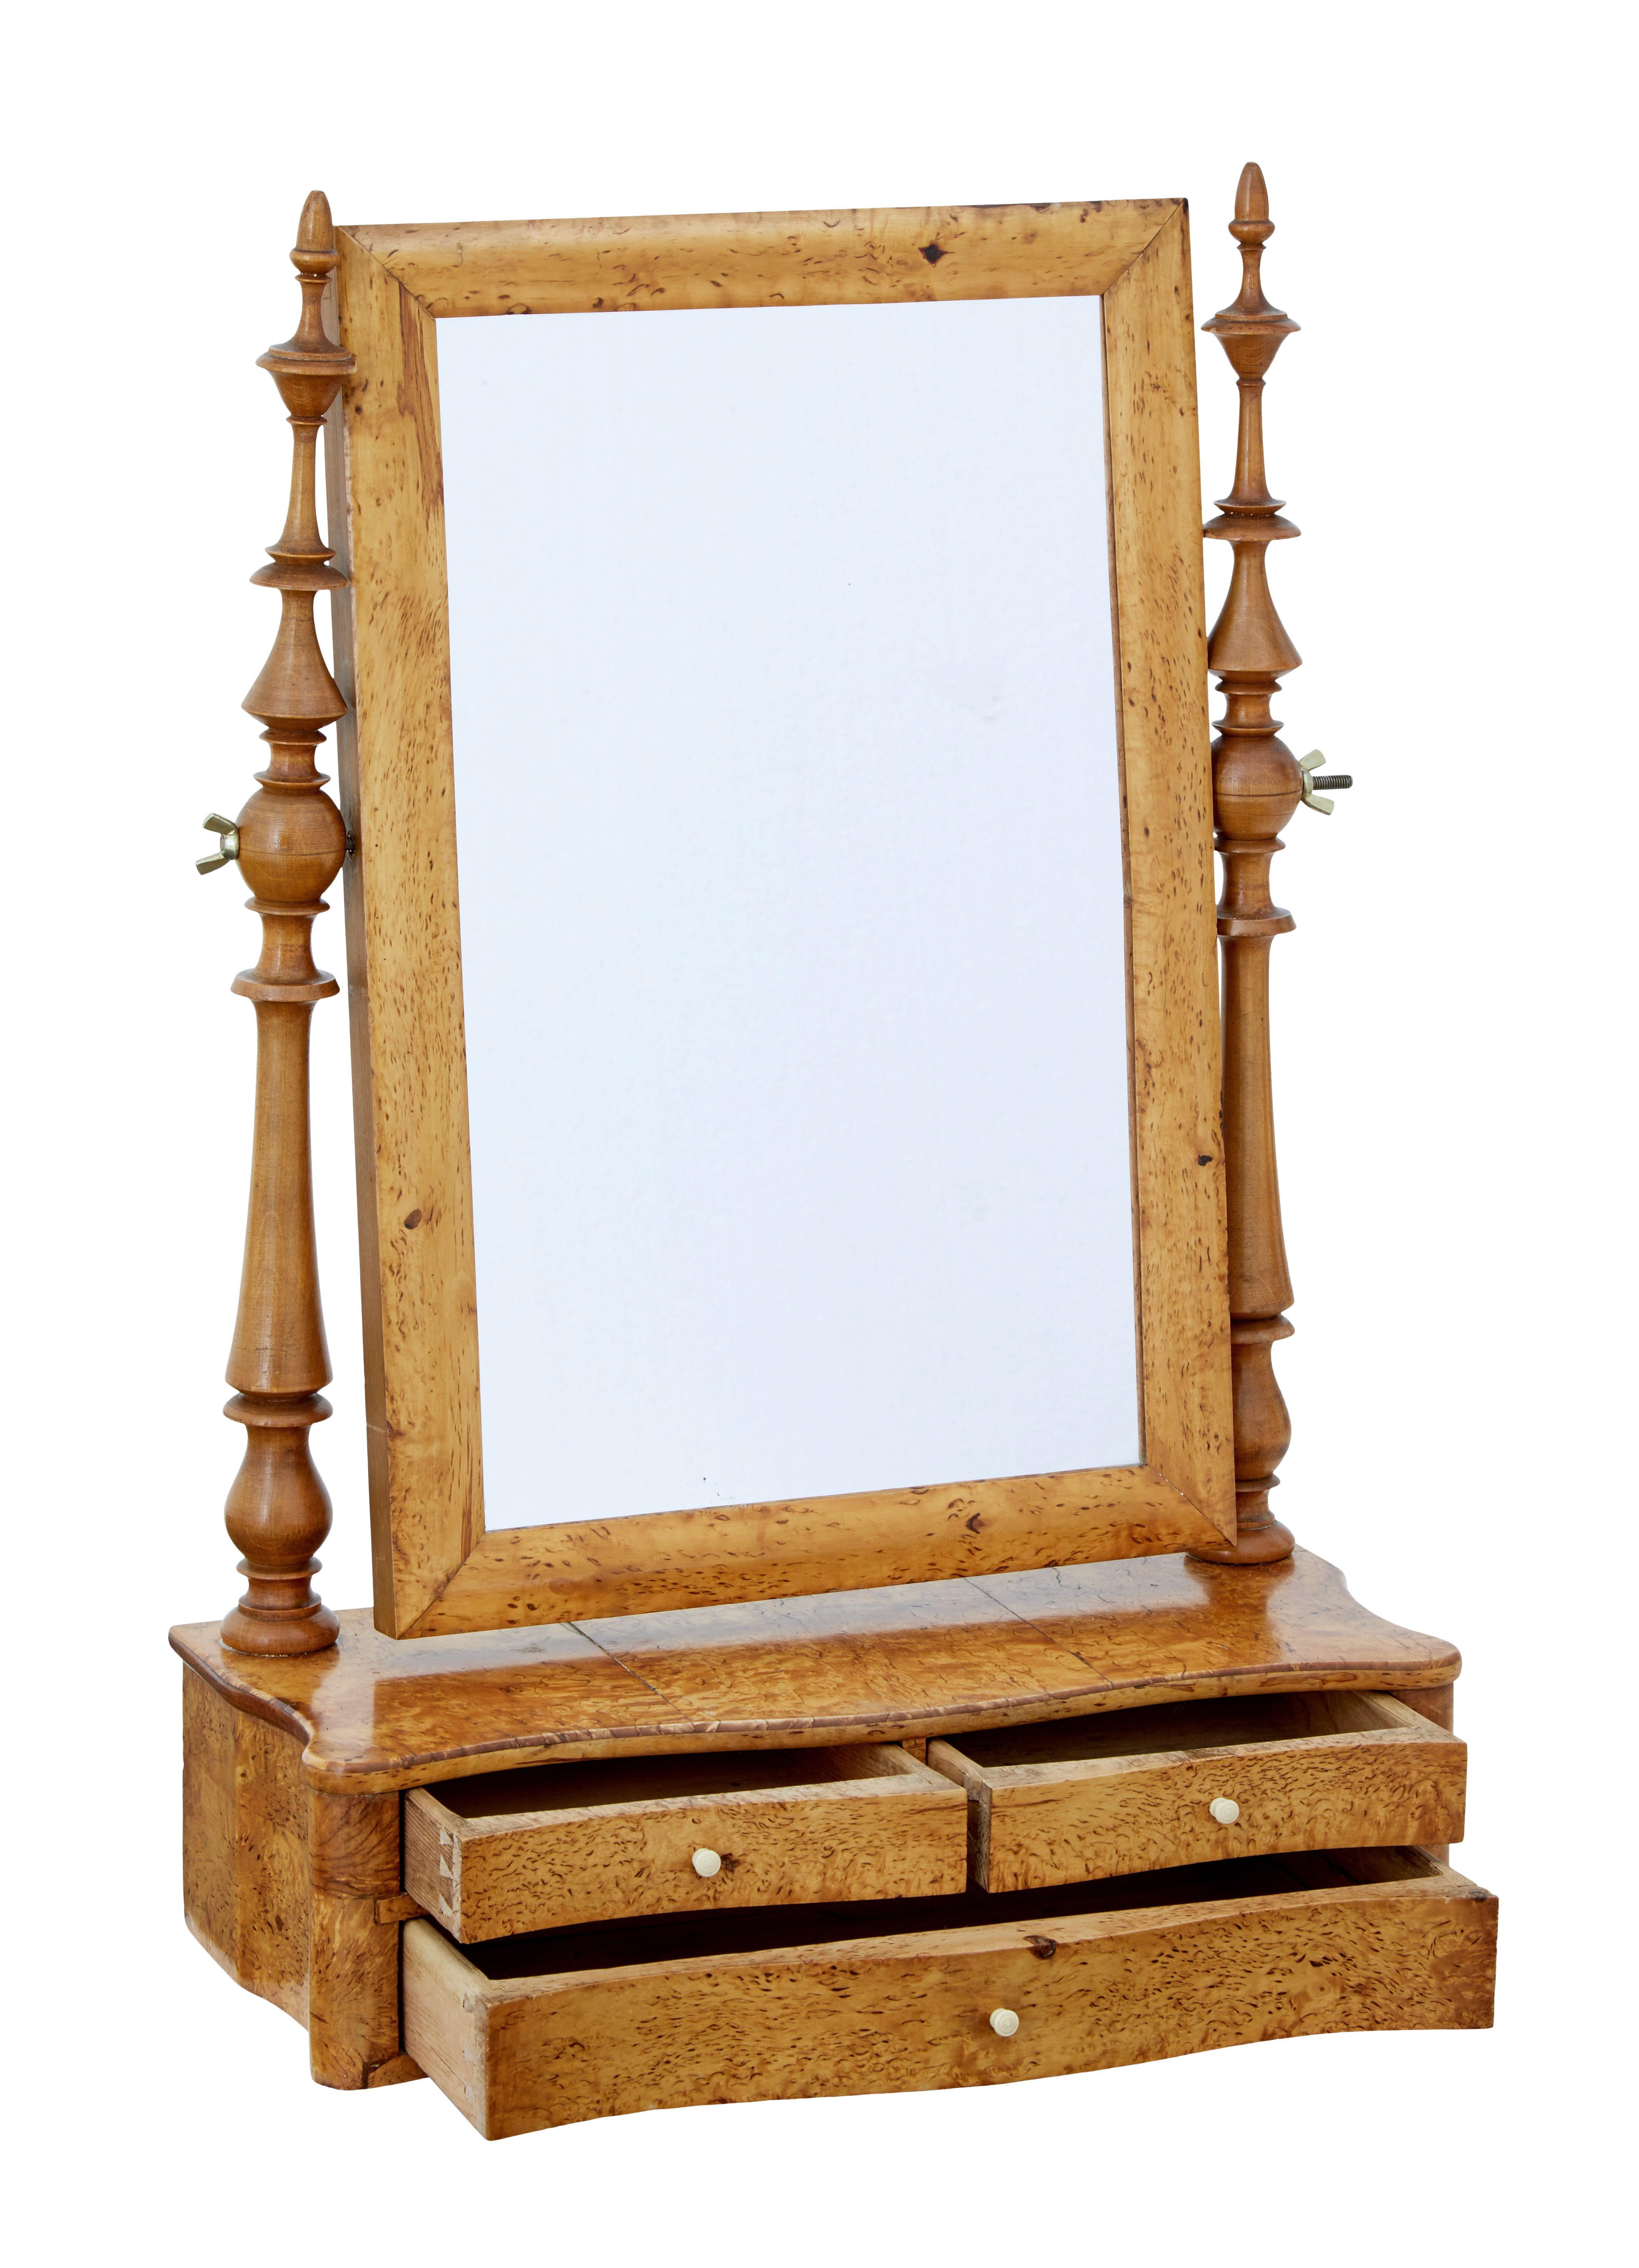 Good quality dressing table vanity mirror circa 1880.

Burr birch rectangular frame held in place by turned supports, standing on a burr birch base of 2 over 1 drawers. Rich golden color which really makes the burr veneer come alive.

Minor